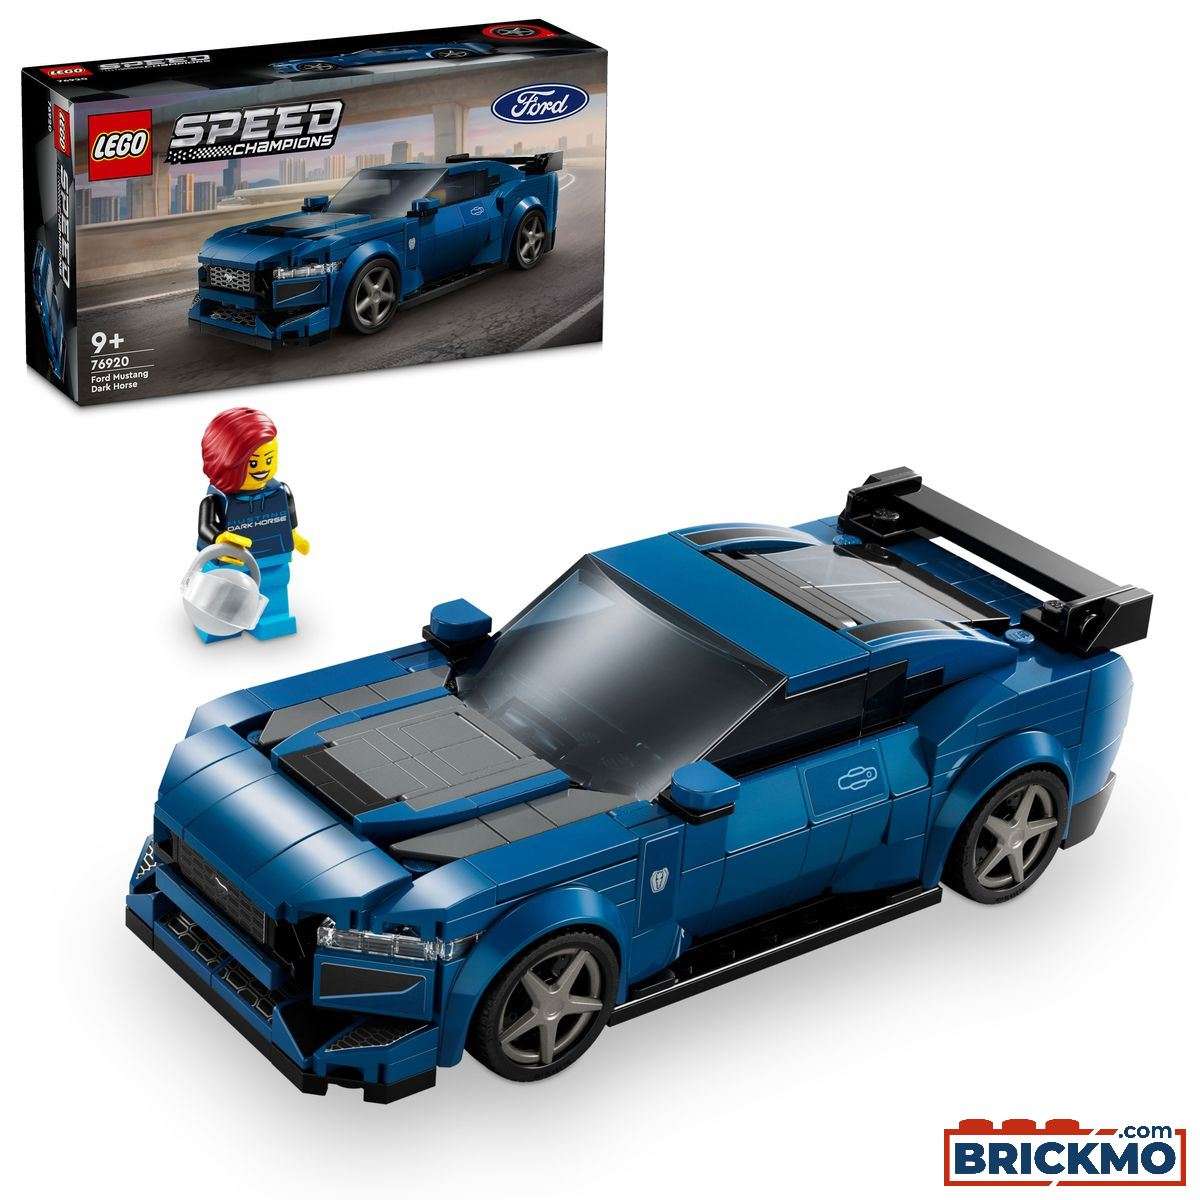 LEGO Speed Champions 76920 Sportowy Ford Mustang Dark Horse 76920